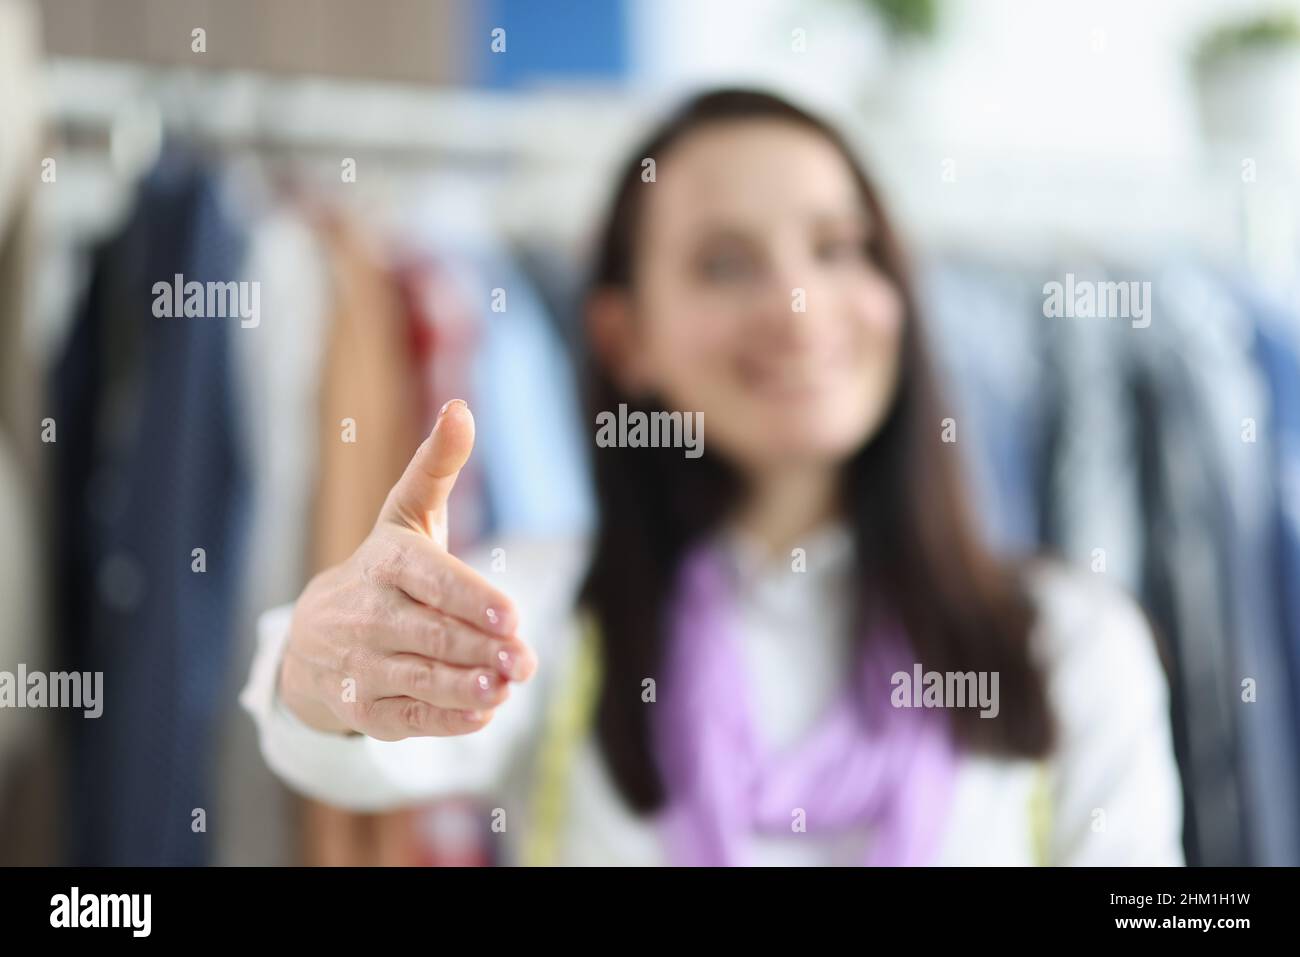 Woman seamstress holds out hand for handshake closeup Stock Photo